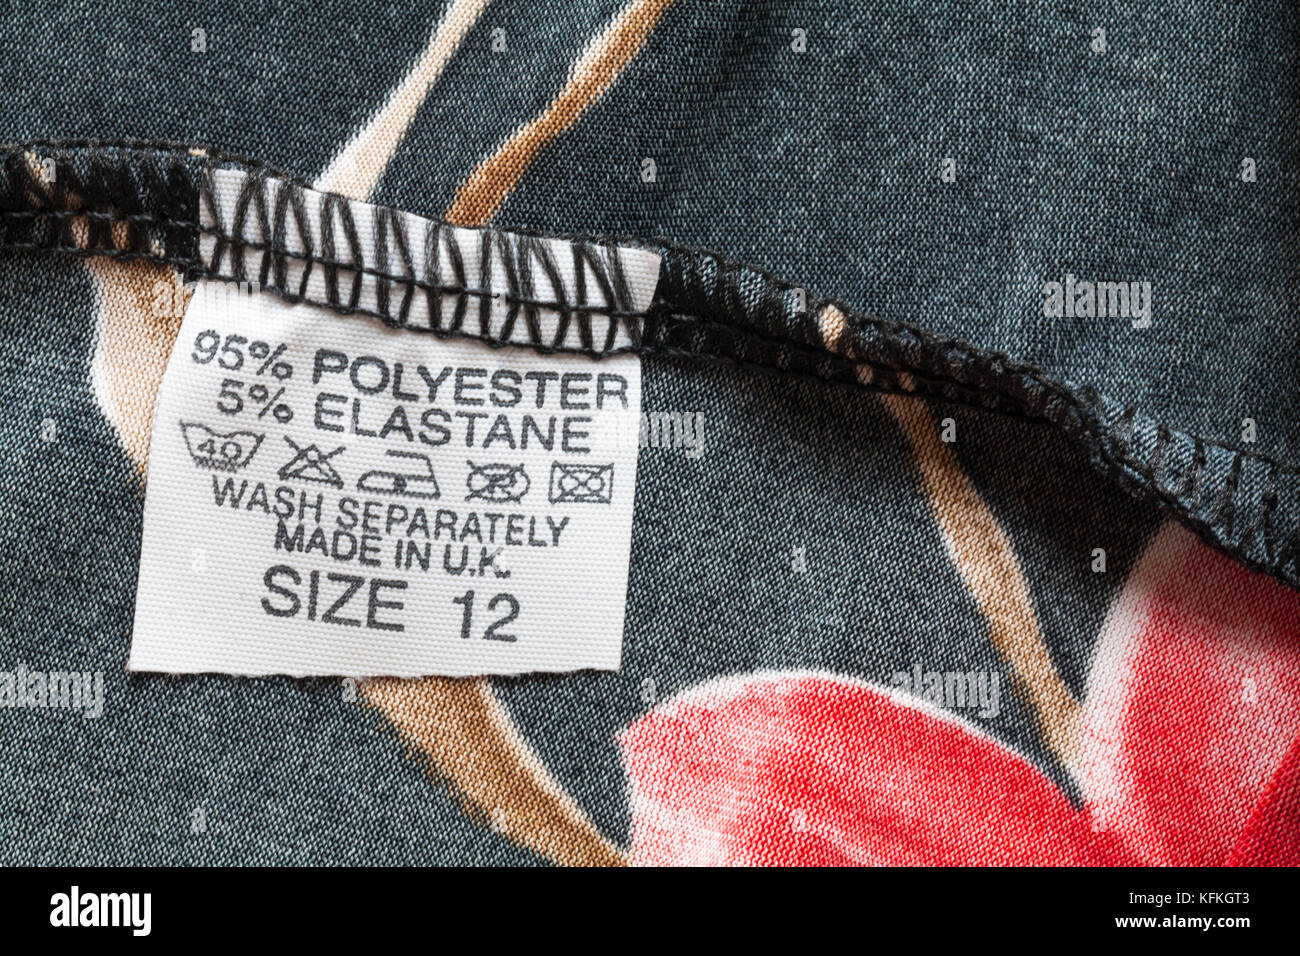 96% polyester 5% elastane label in woman's top size 12 made in U.K. with wash care symbols Stock Photo